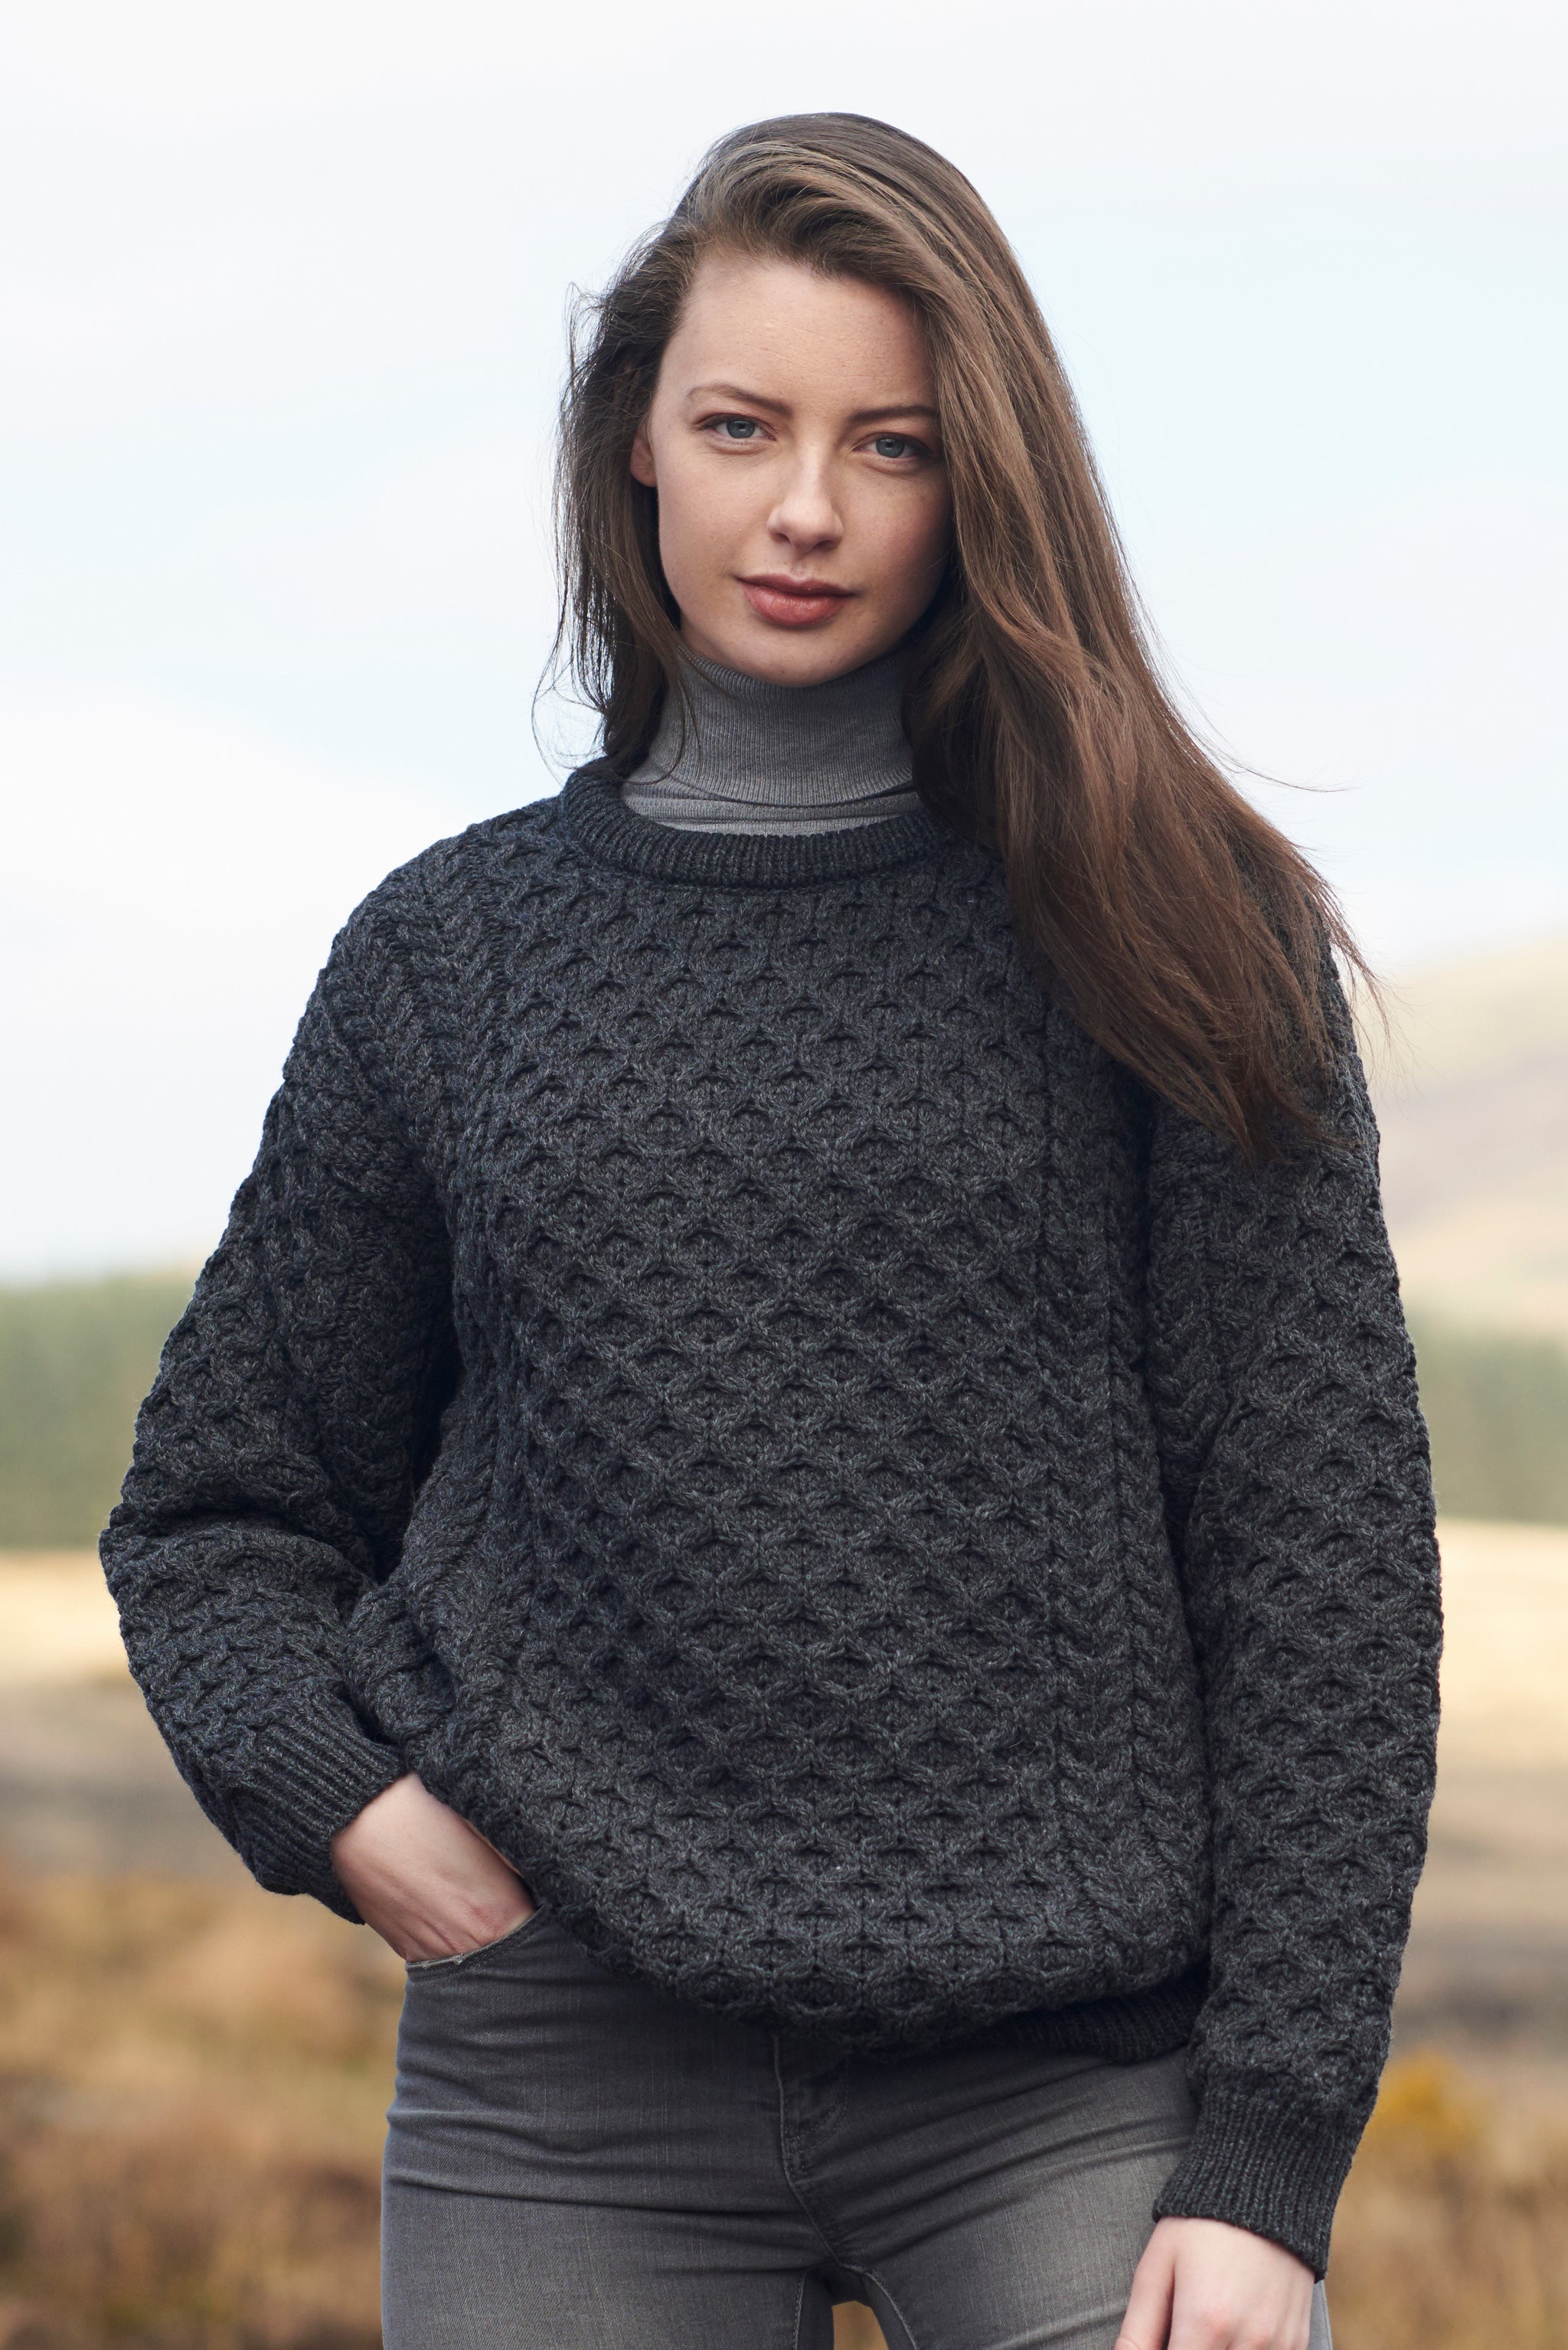 Ladies Soft Wool Gray Sweater - Made in Ireland - Fast Shipping from US